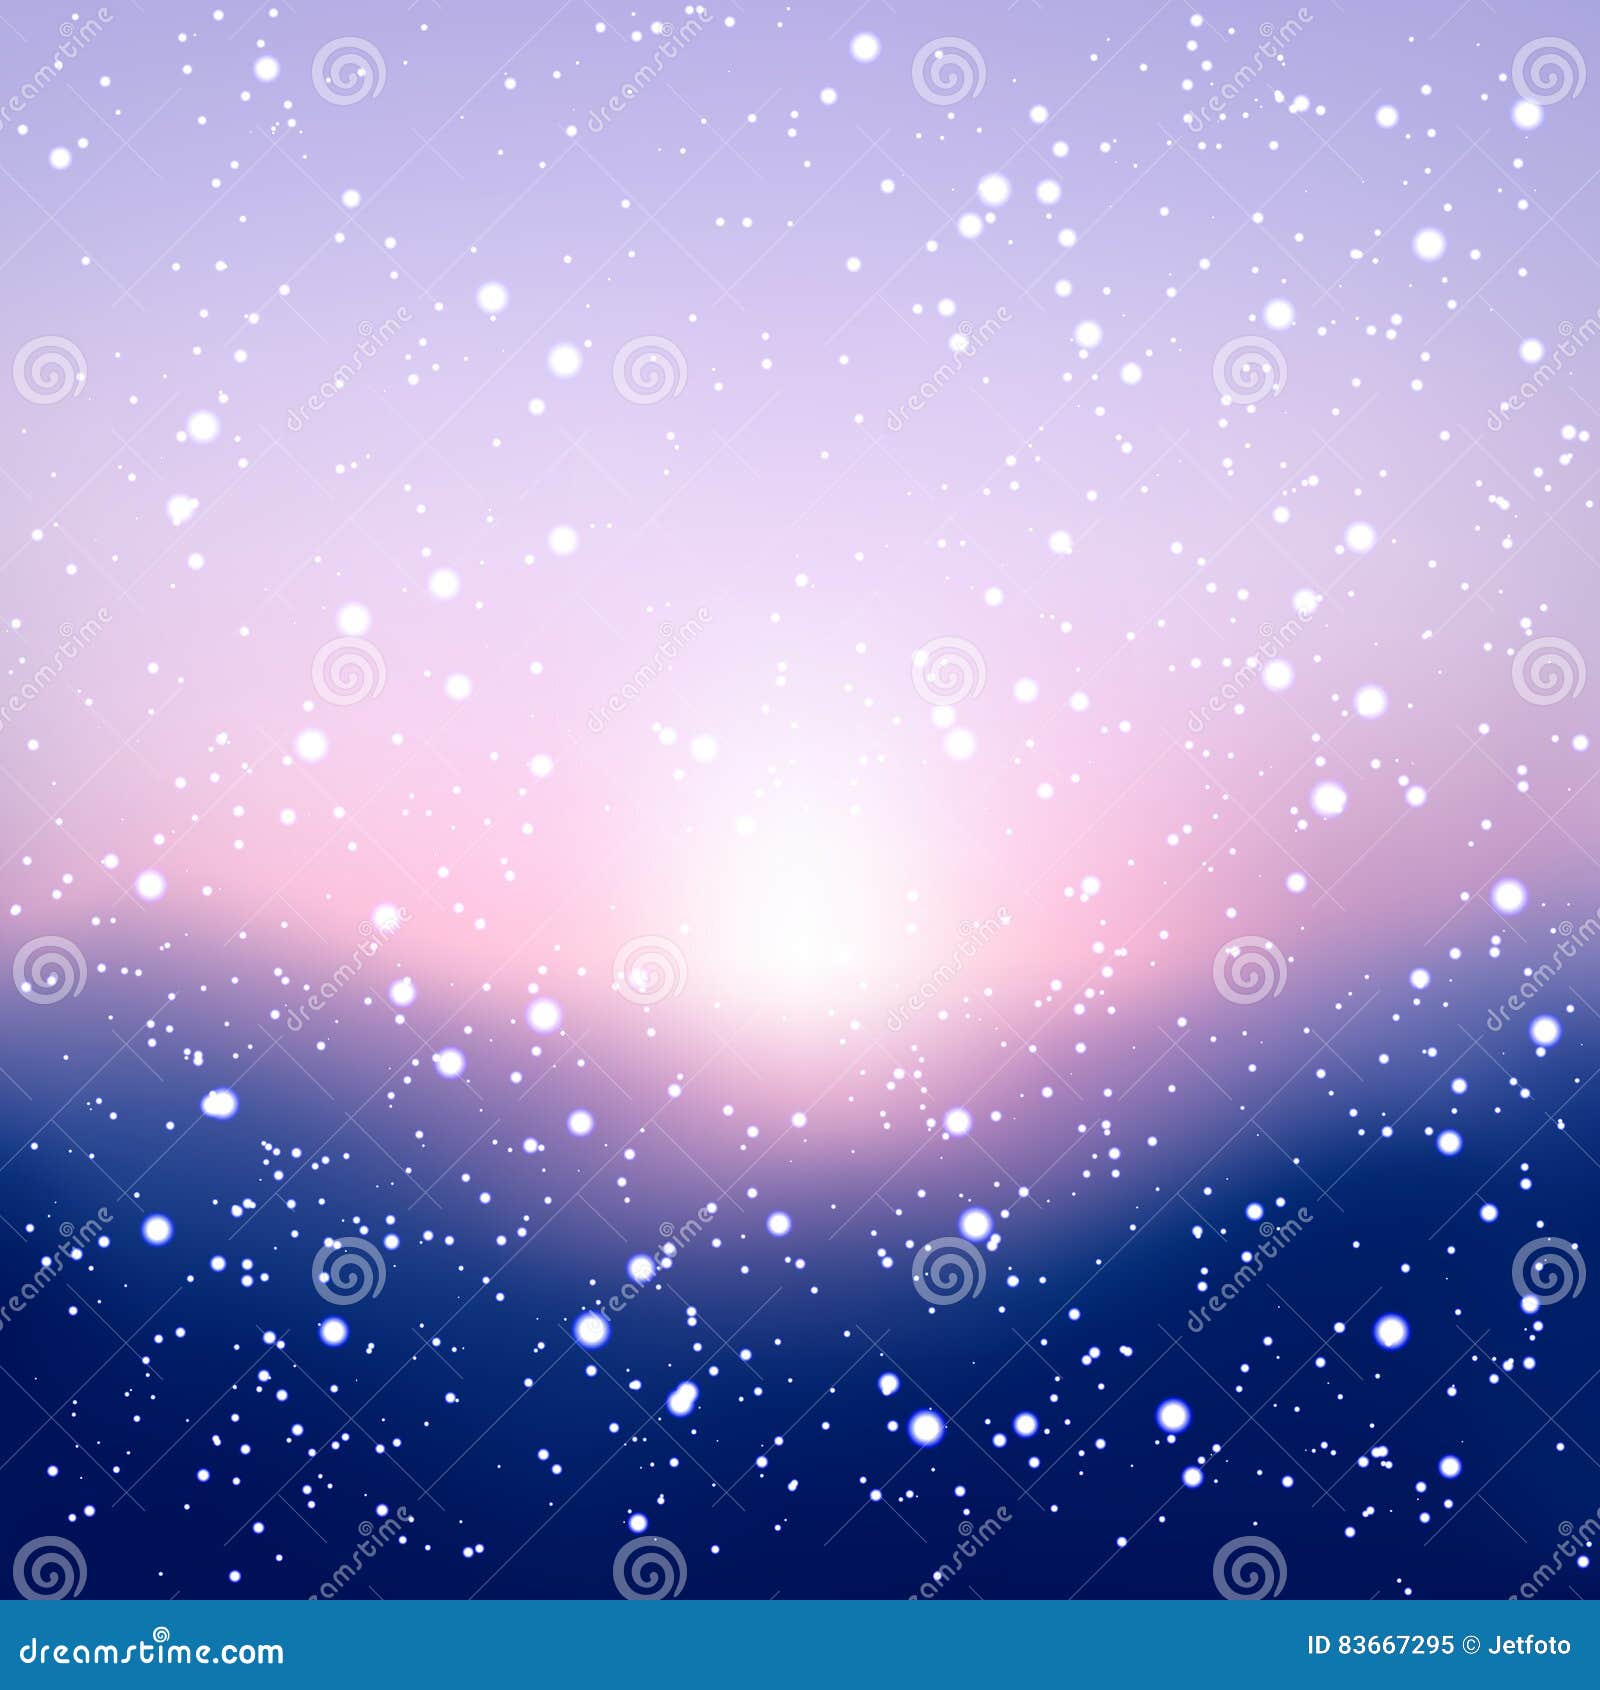 Blurred Winter Background With Snow And Sunrise Stock Vector